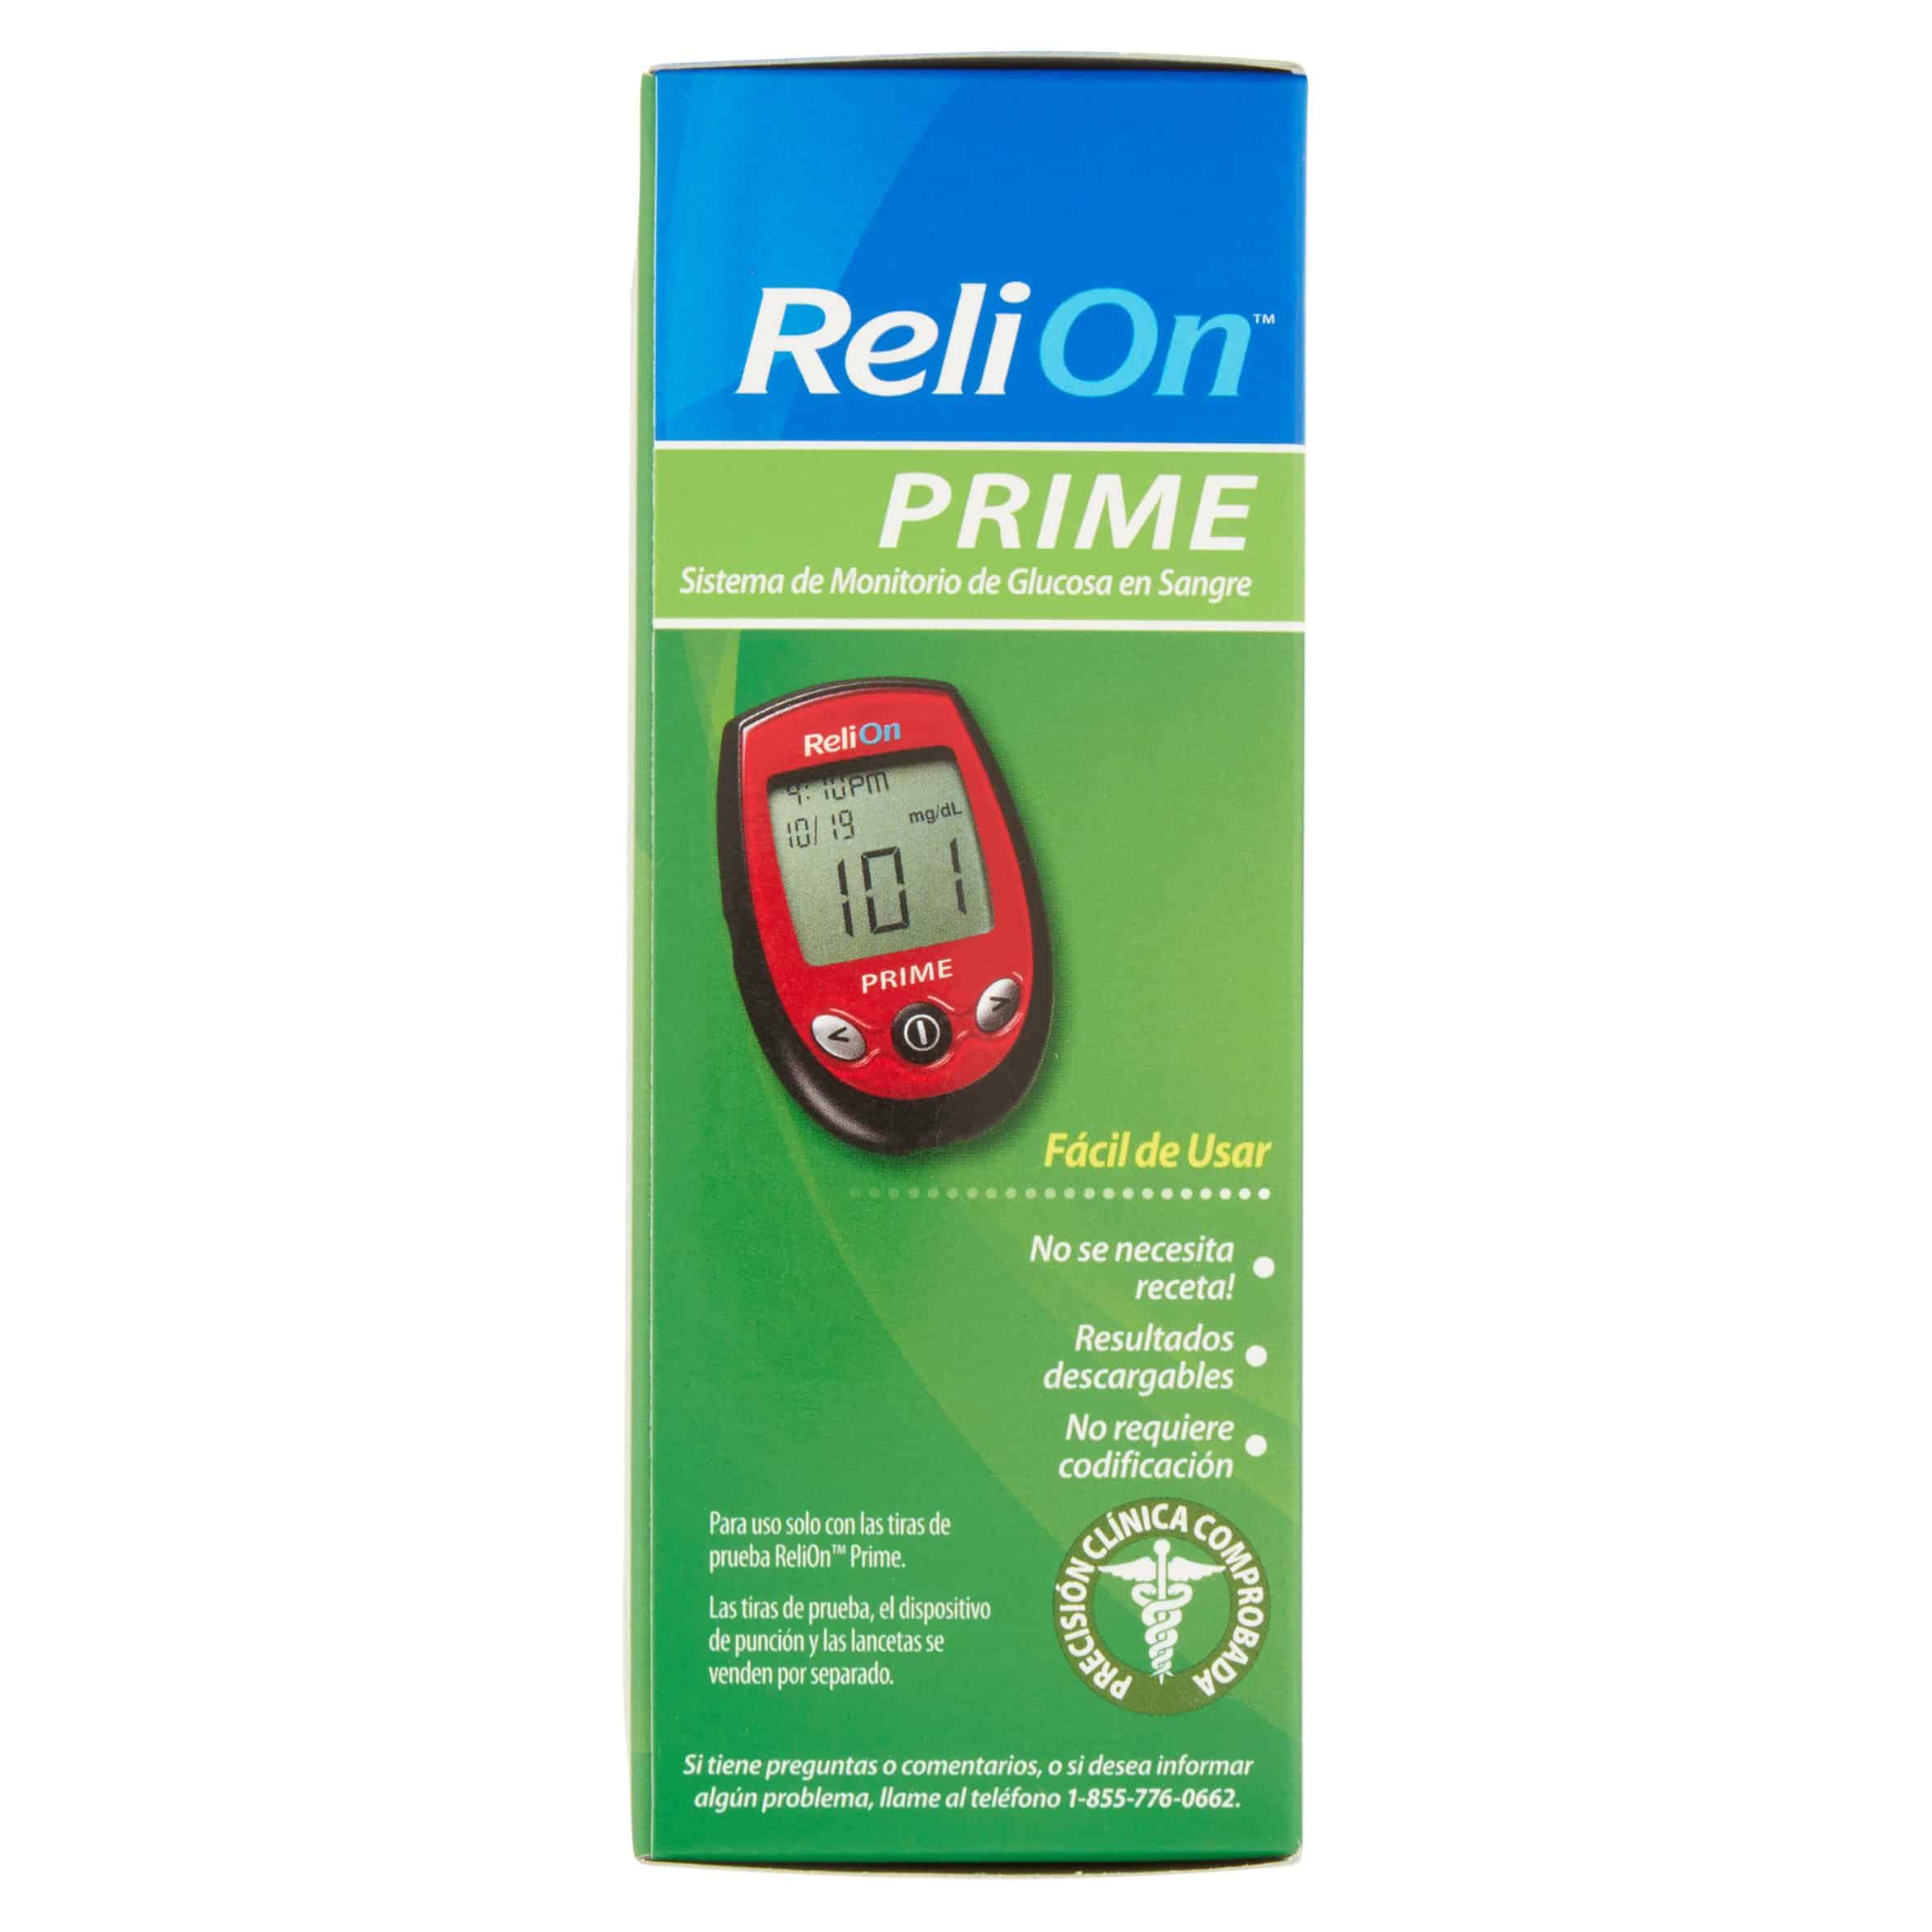 ReliOn Prime Blood Glucose Monitoring System, Red 605388022936